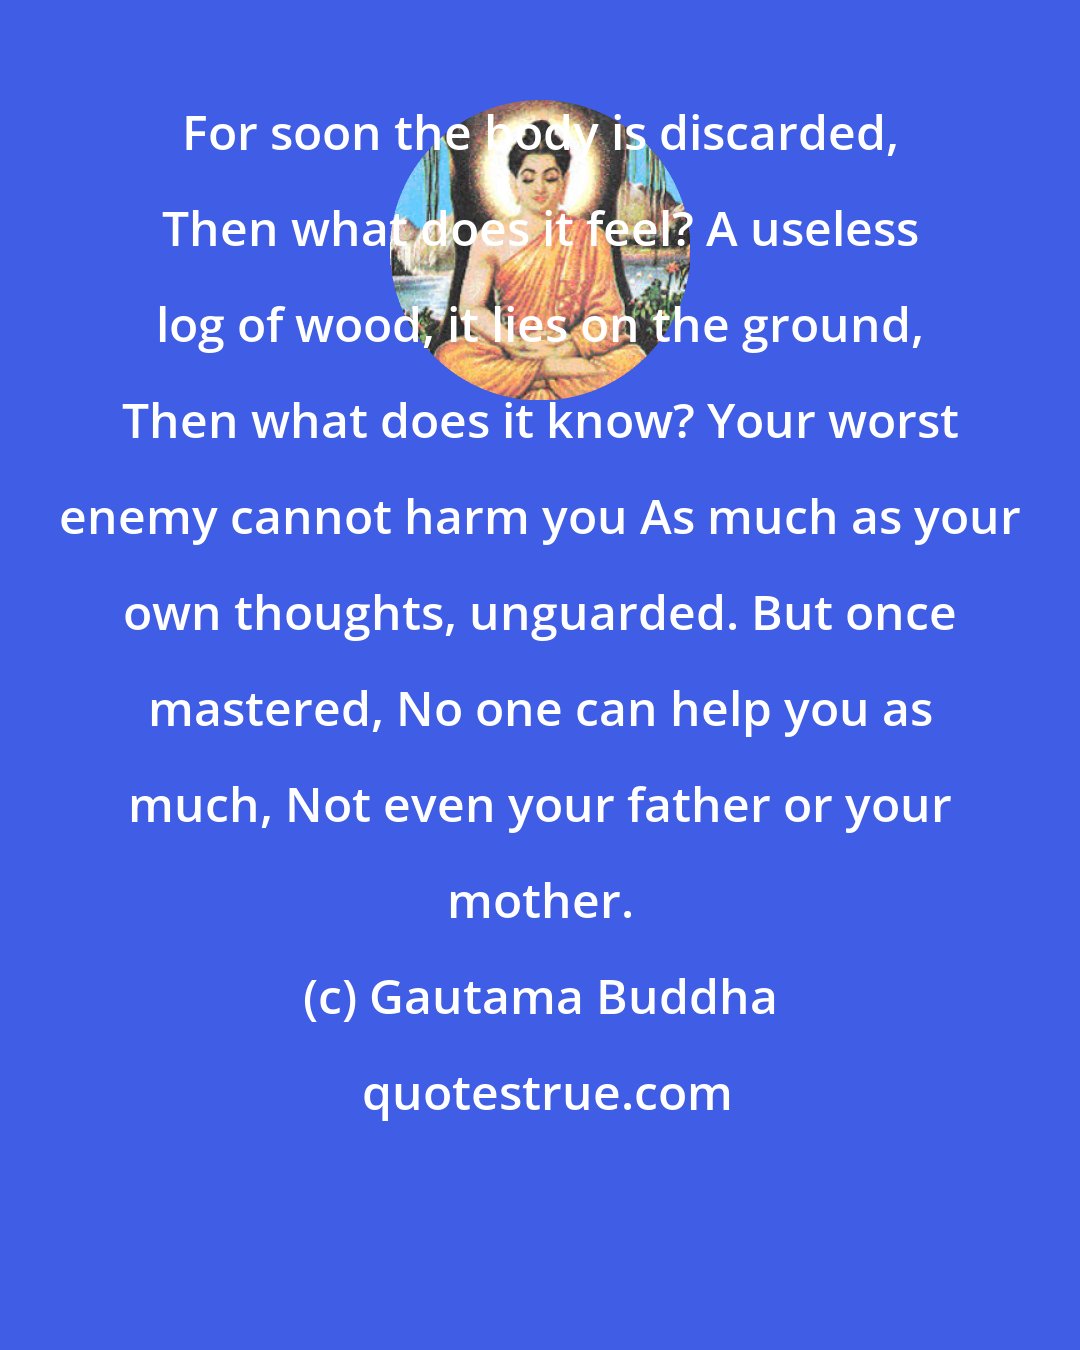 Gautama Buddha: For soon the body is discarded, Then what does it feel? A useless log of wood, it lies on the ground, Then what does it know? Your worst enemy cannot harm you As much as your own thoughts, unguarded. But once mastered, No one can help you as much, Not even your father or your mother.